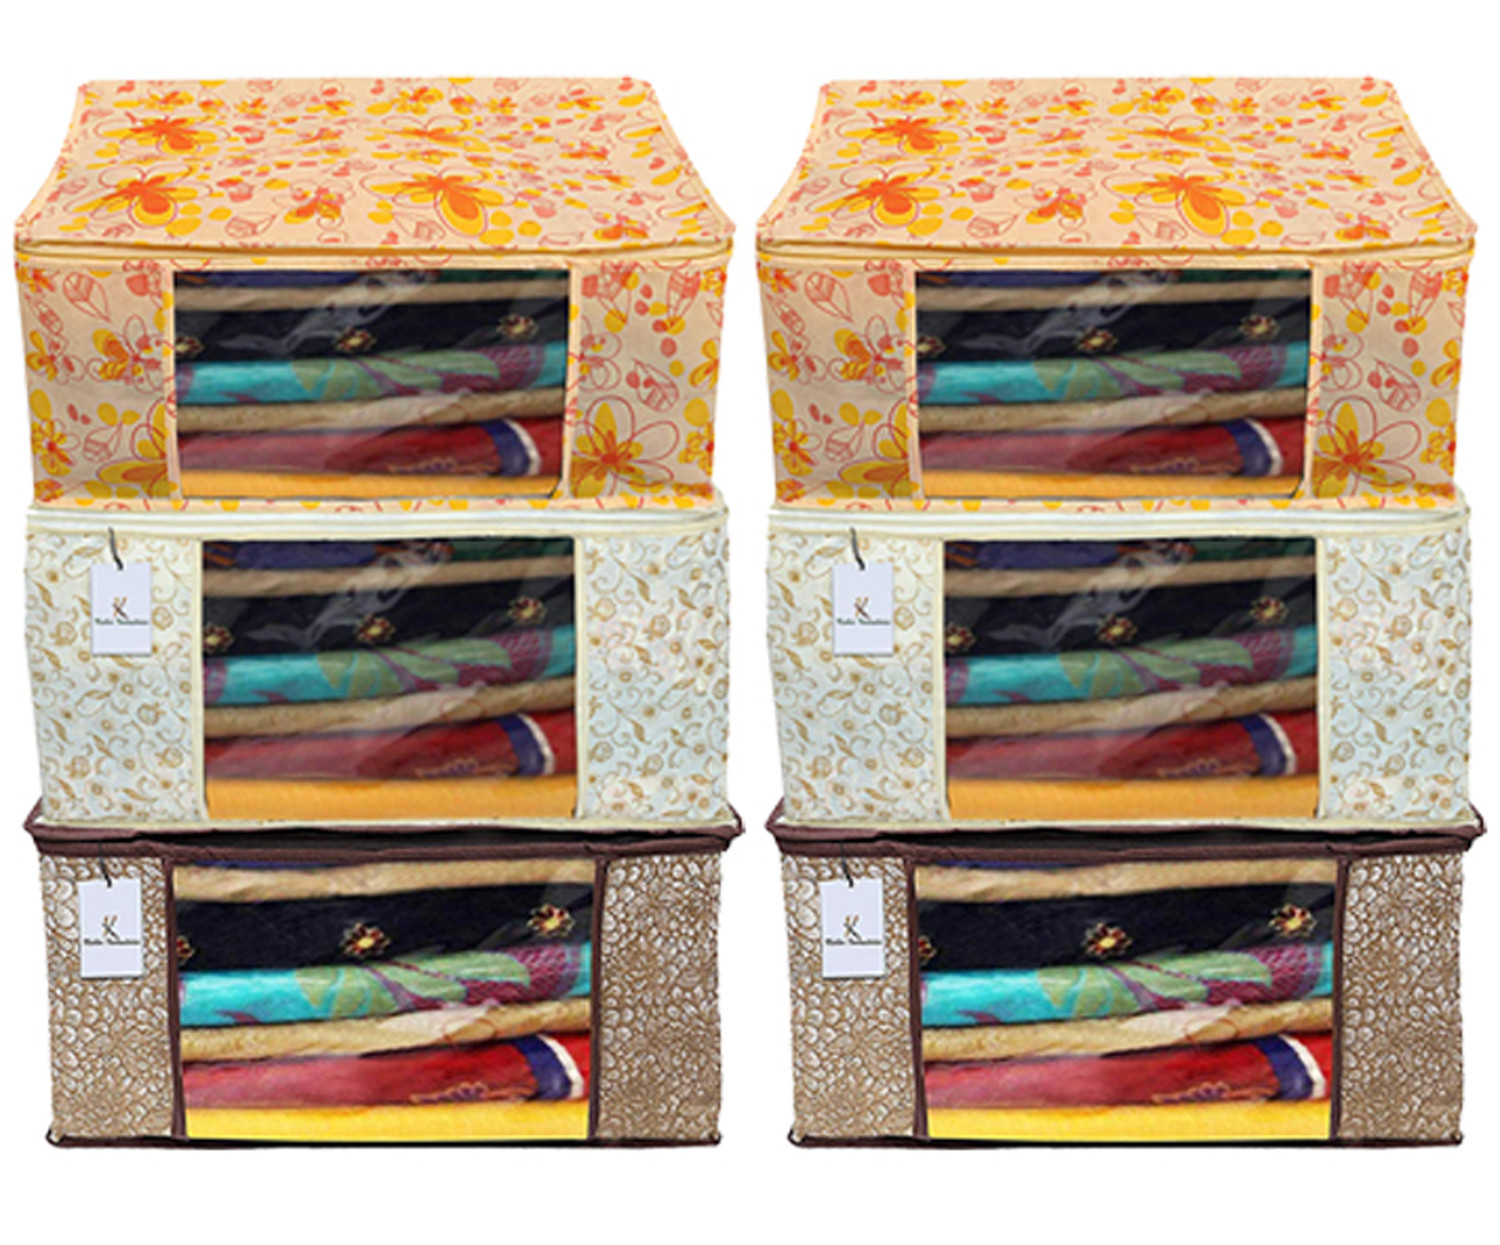 Kuber Industries Metalic Printed Non Woven Fabric Saree Cover Set with Transparent Window, Extra Large, Brown & Golden Brown & Ivory Red -CTKTC40797